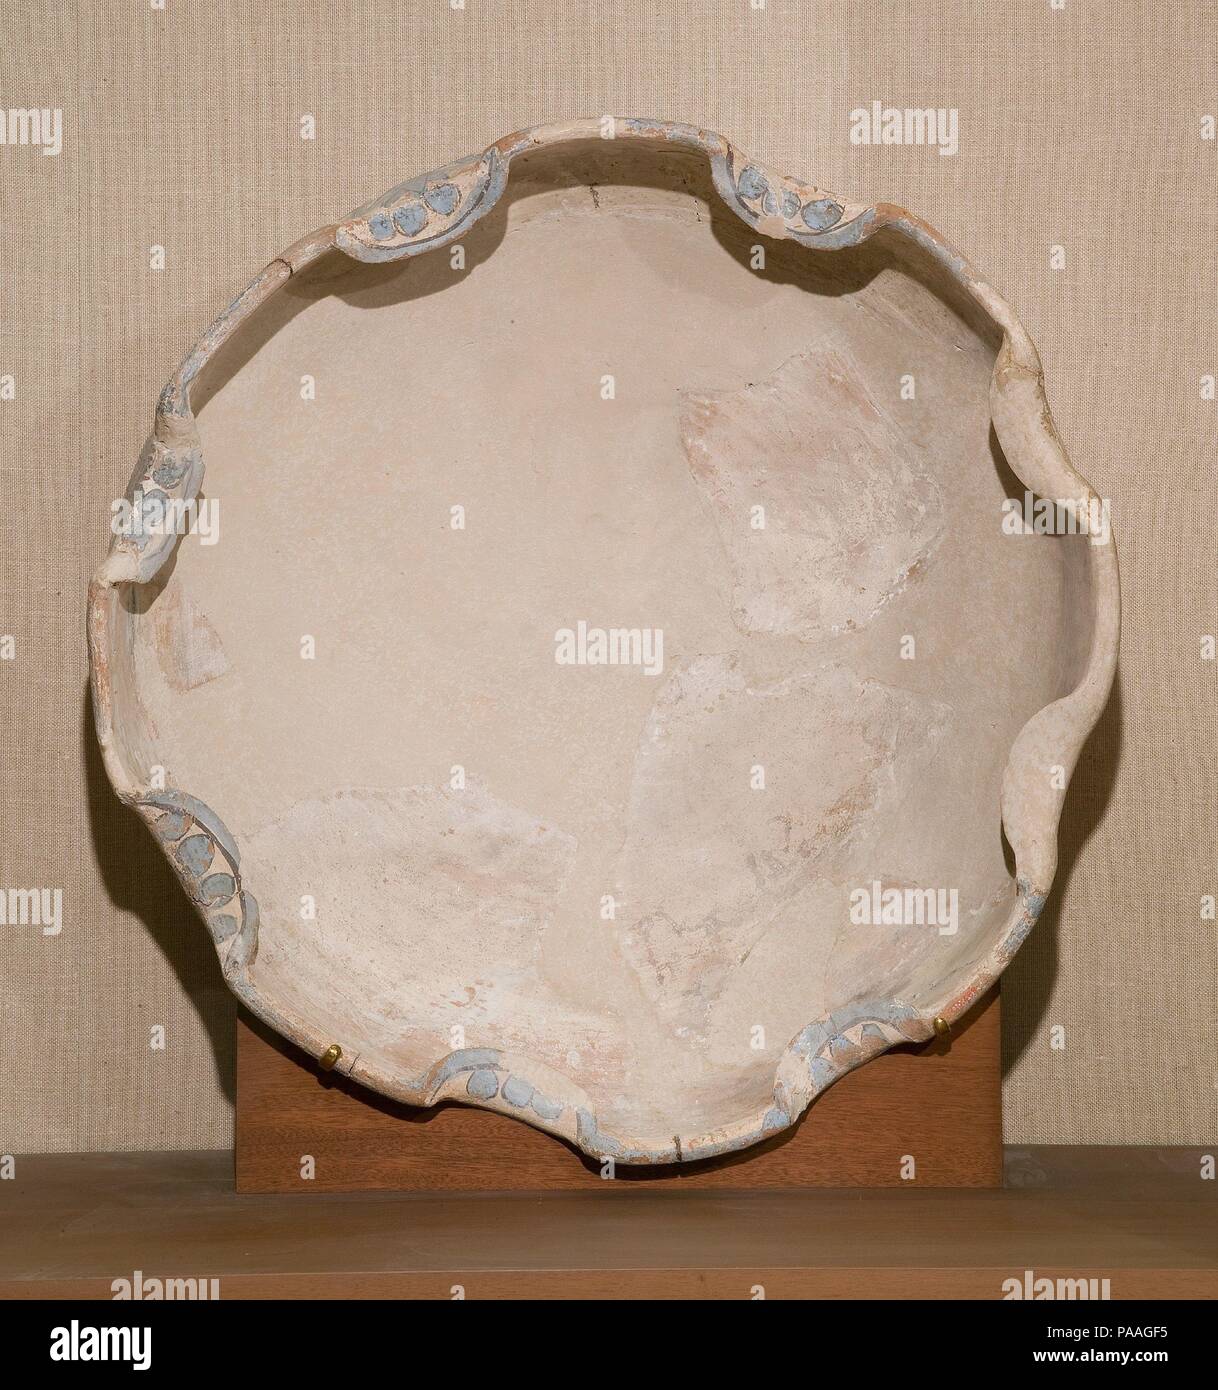 Blue-Painted Dish from Malqata. Dimensions: H. 25 cm (9 13/16 in); diam. 75 cm (29 1/2 in). Dynasty: Dynasty 18. Reign: reign of Amenhotep III. Date: ca. 1390-1353 B.C..  This enormous dish is decorated around the rim with the floral motifs found on other pottery from the site of Malqata (see 11.215.460-11.215.477). Museum: Metropolitan Museum of Art, New York, USA. Stock Photo